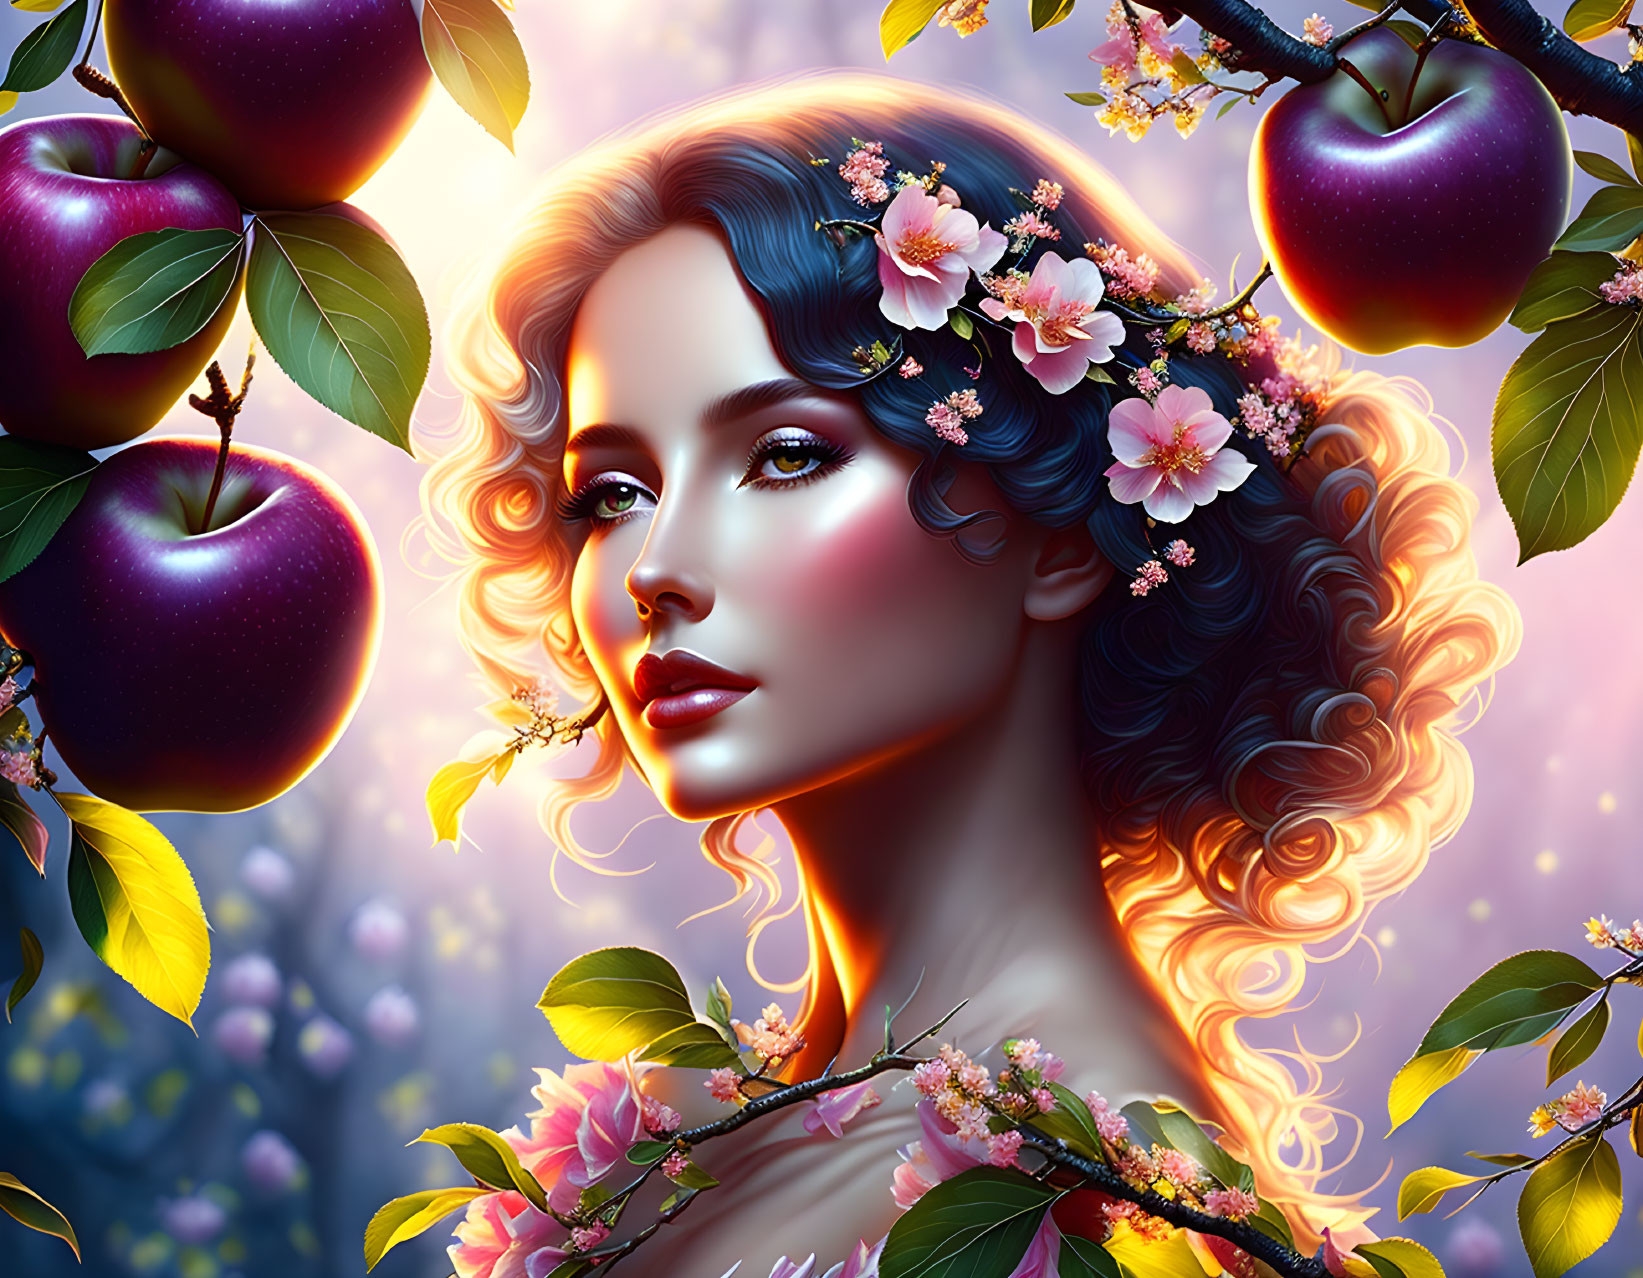 Woman with flowing hair among apple blossoms and ripe apples in colorful fantasy scene